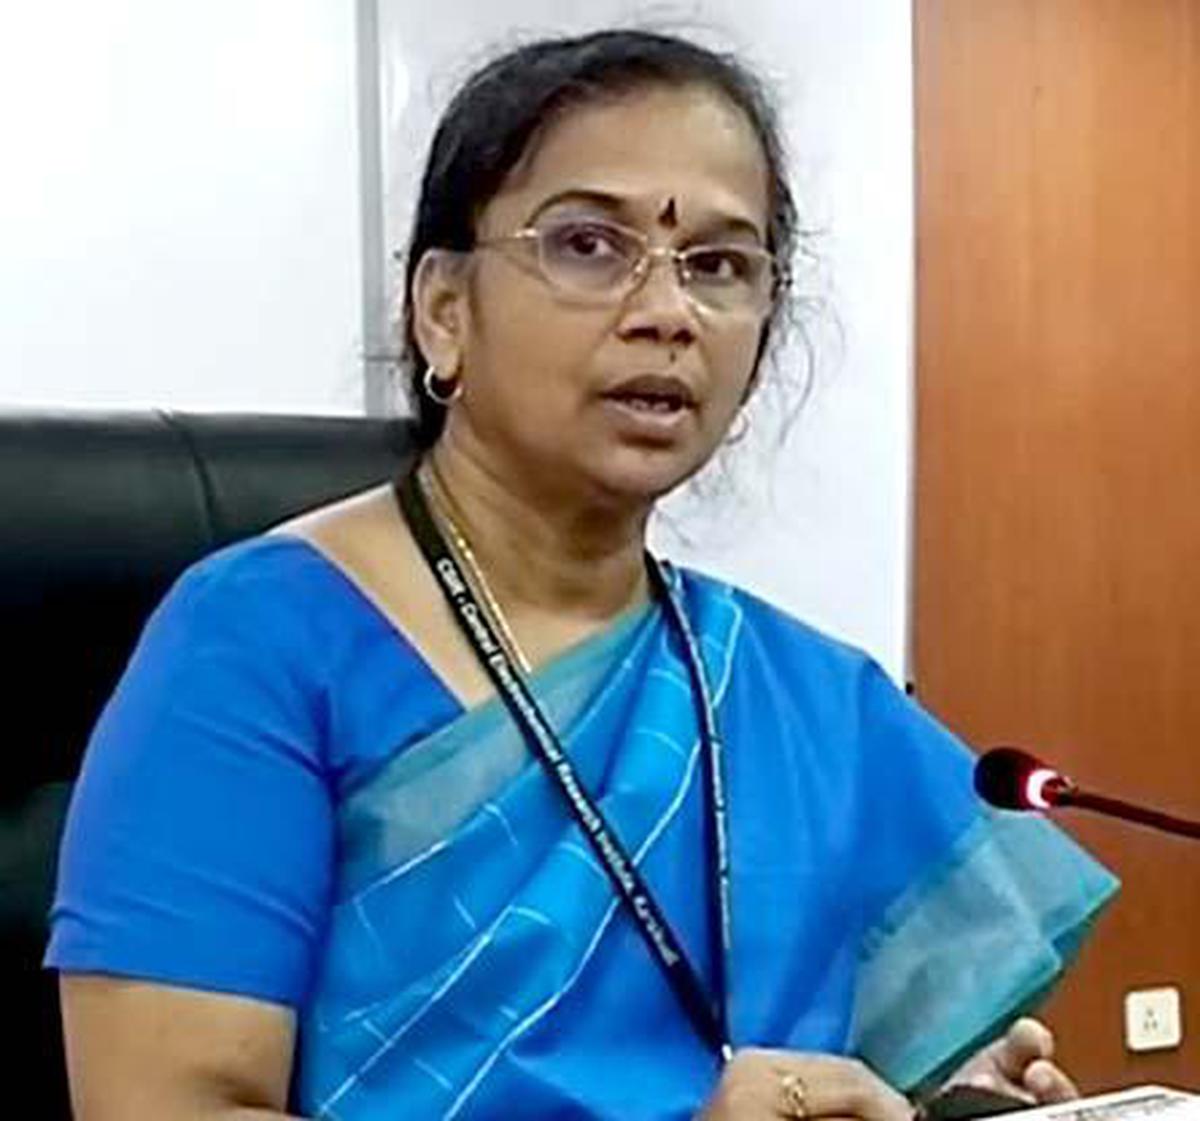 N. Kalaiselvi, appointed as the chief of the CSIR, the first woman in the position, addresses a press conference in Karaikudi in August 2022.